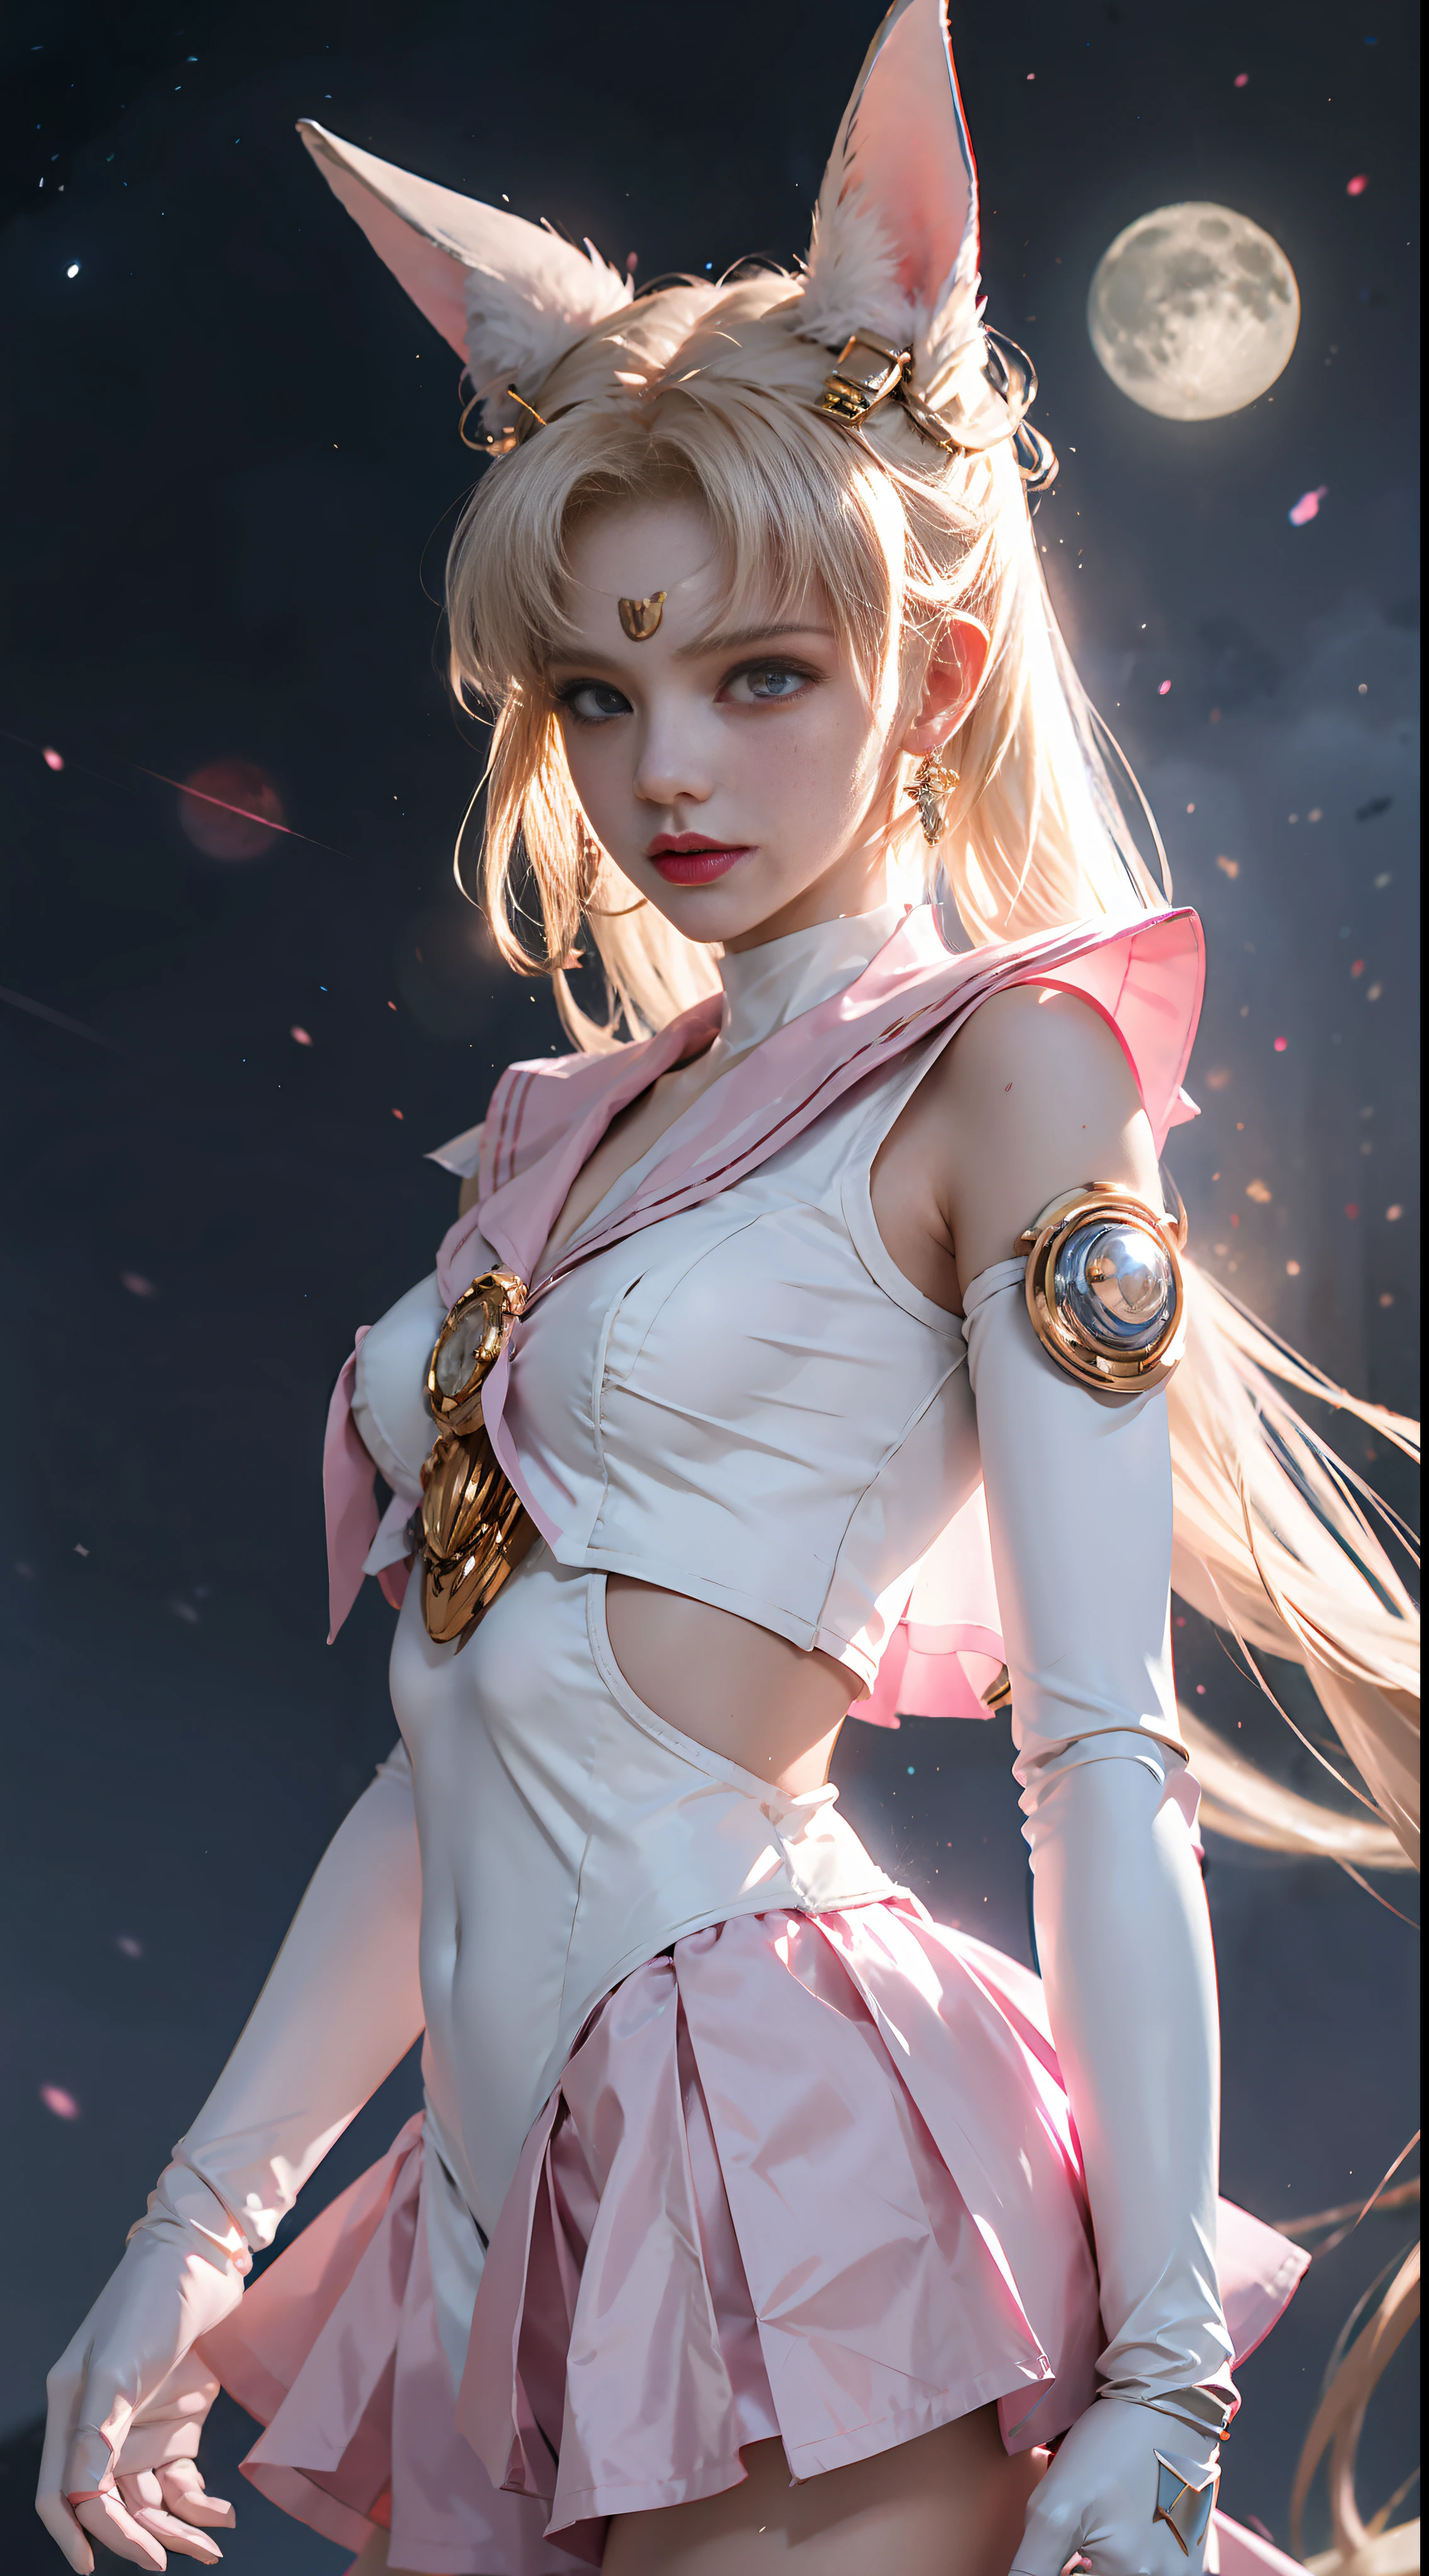 1 Mechanical Girl: 1.4, Sailor Moon, White Mechanical Arm, Humanoid Body, Pink Sailor Suit, Good-looking Face, Sailor Moon, Wings, Moon Hare, Rabbit Ears, Mechanical Ears, White Top, Blonde Hair, Mechanical Arm, Pink Skirt, Side, Halo, Sci-Fi Background, Hair Glow, Forehead Light, Moon, anglewings, Panorama, Glowing Ring on the background